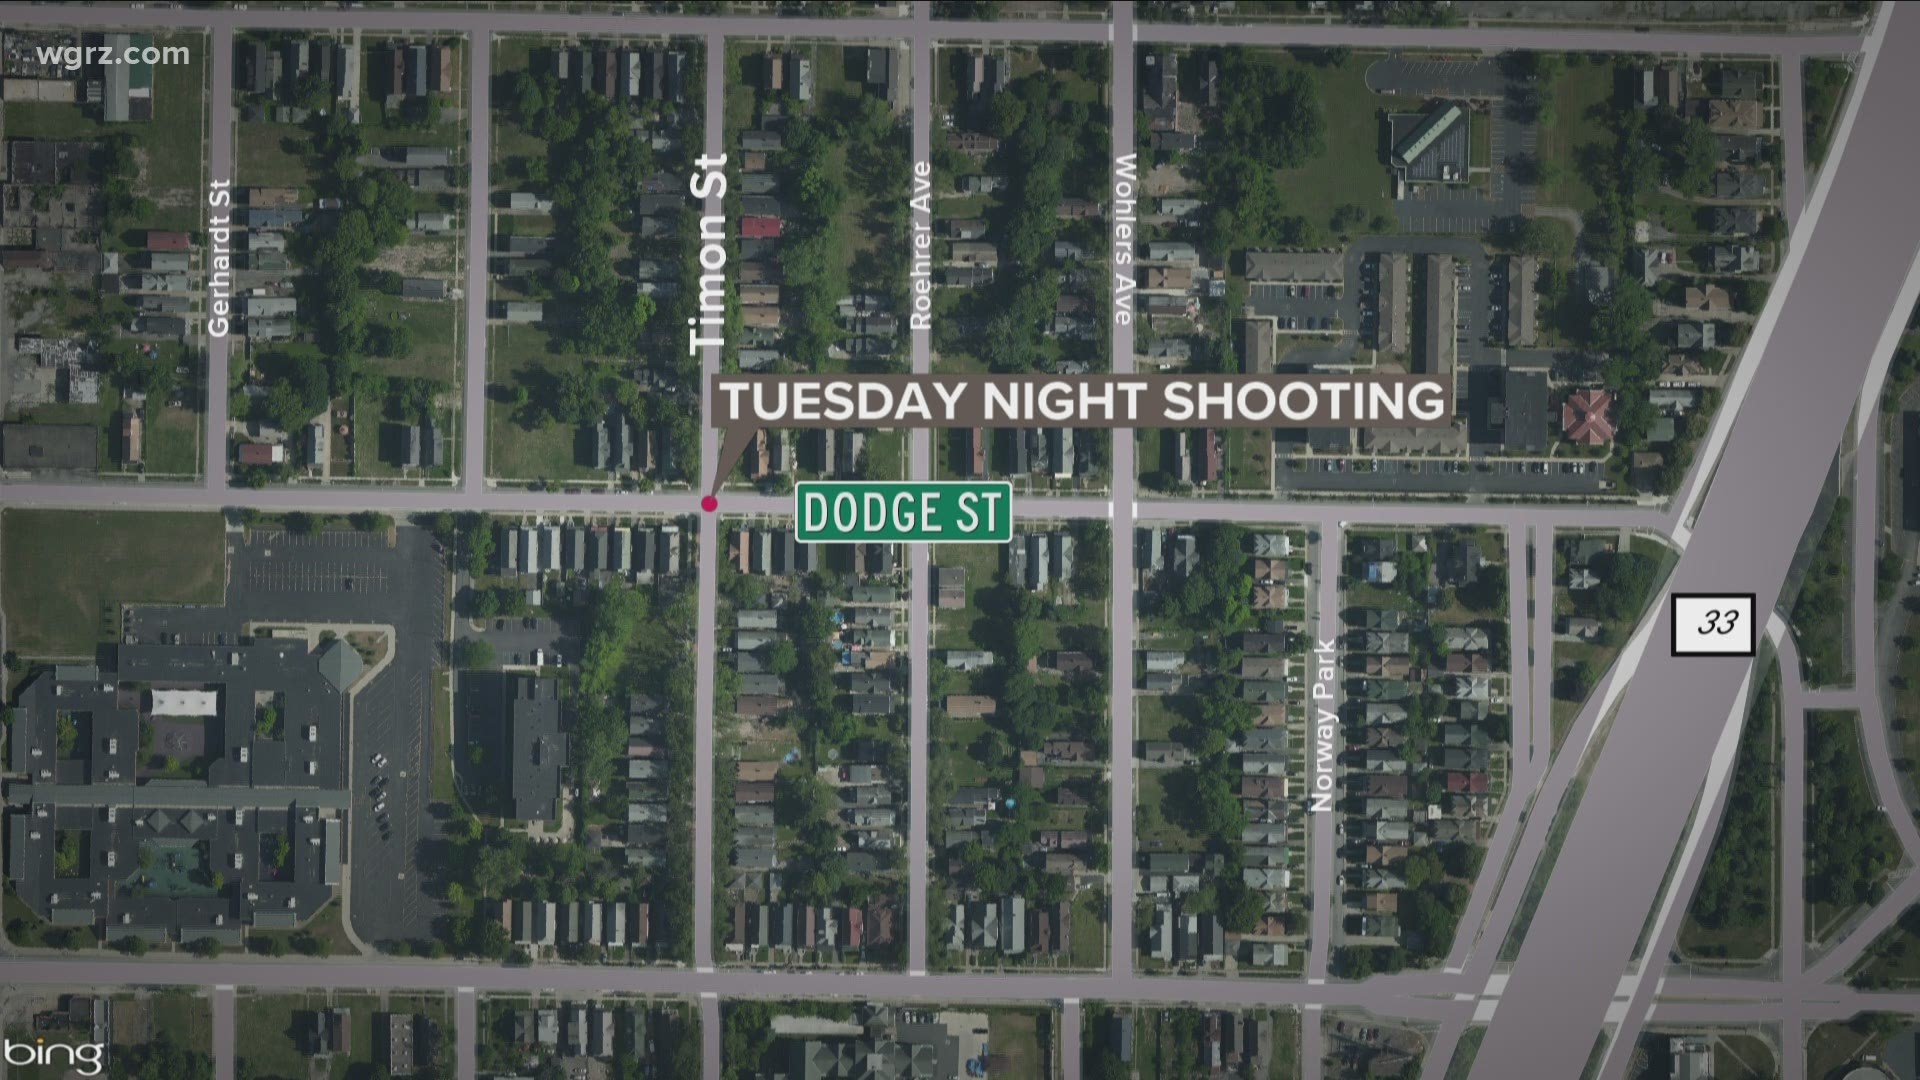 A 17-year-old victim is in stable condition after being shot near Timon and Dodge streets, Tuesday evening.